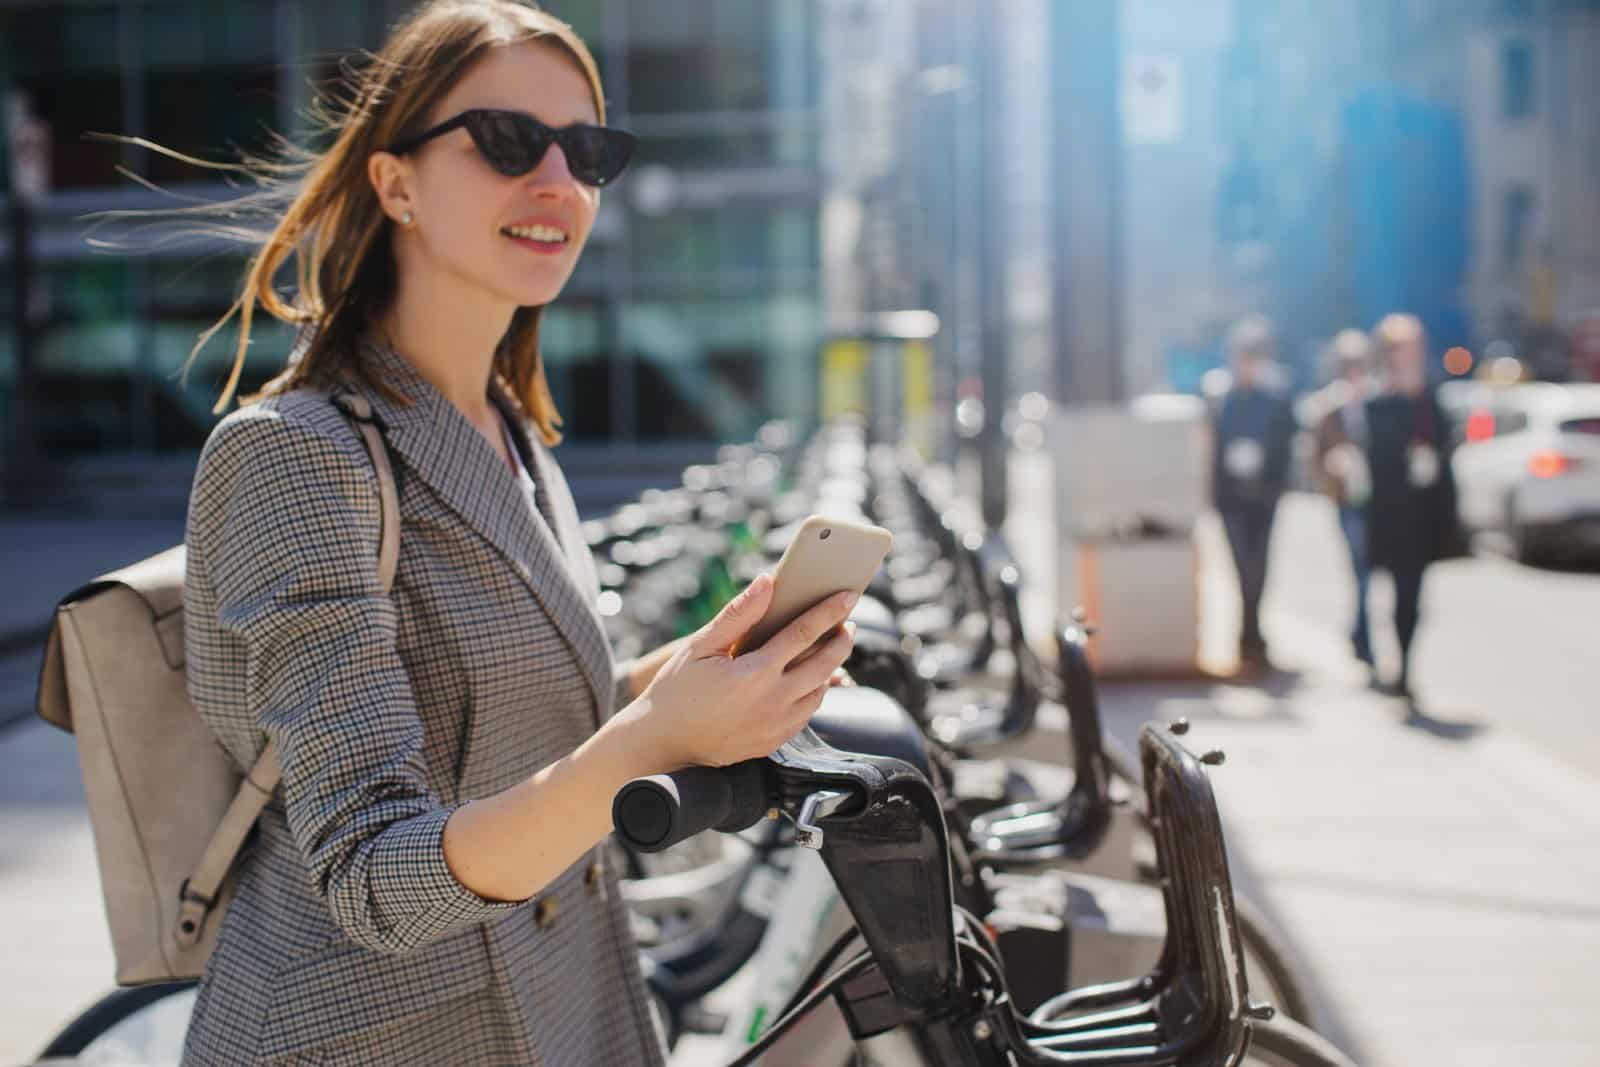 <p class="wp-caption-text">Image Credit: Shutterstock / AnastasiaDudka</p>  <p><span>Utilizing public transportation and bike-sharing programs is not only budget-friendly but also significantly reduces your travel-related carbon emissions. Many cities worldwide offer extensive metro, bus, and tram networks that provide an efficient and low-cost way to explore. Bike-sharing programs in urban and some rural areas offer a healthy and eco-friendly alternative to car rentals and taxis.</span></p> <p><b>Insider’s Tip: </b><span>Purchase a travel card or pass if you plan to use public transportation frequently. Many cities offer tourist passes that include unlimited travel for a set number of days and discounts on attractions.</span></p> <p><b>When to Travel: </b><span>Public transportation and bike-sharing are available year-round, but nicer weather will make biking and walking more enjoyable.</span></p> <p><b>How to Get There: </b><span>Choose destinations known for their reliable and comprehensive public transport systems or extensive bike paths to maximize your sustainable travel options.</span></p>